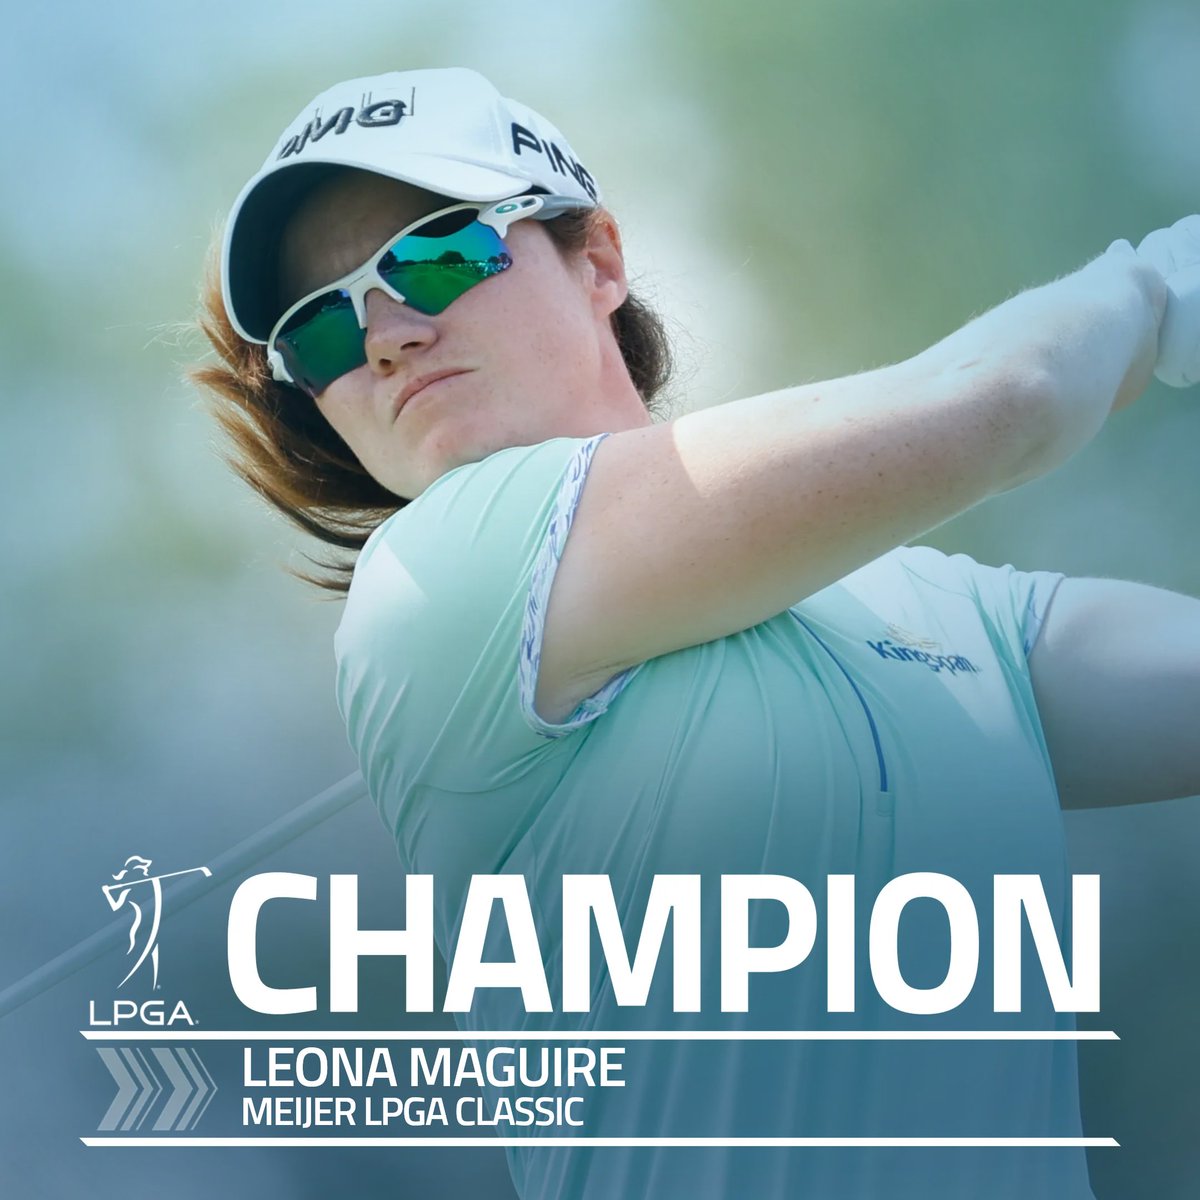 And she does it! @leona_maguire is victorious at @MeijerLPGA 👊